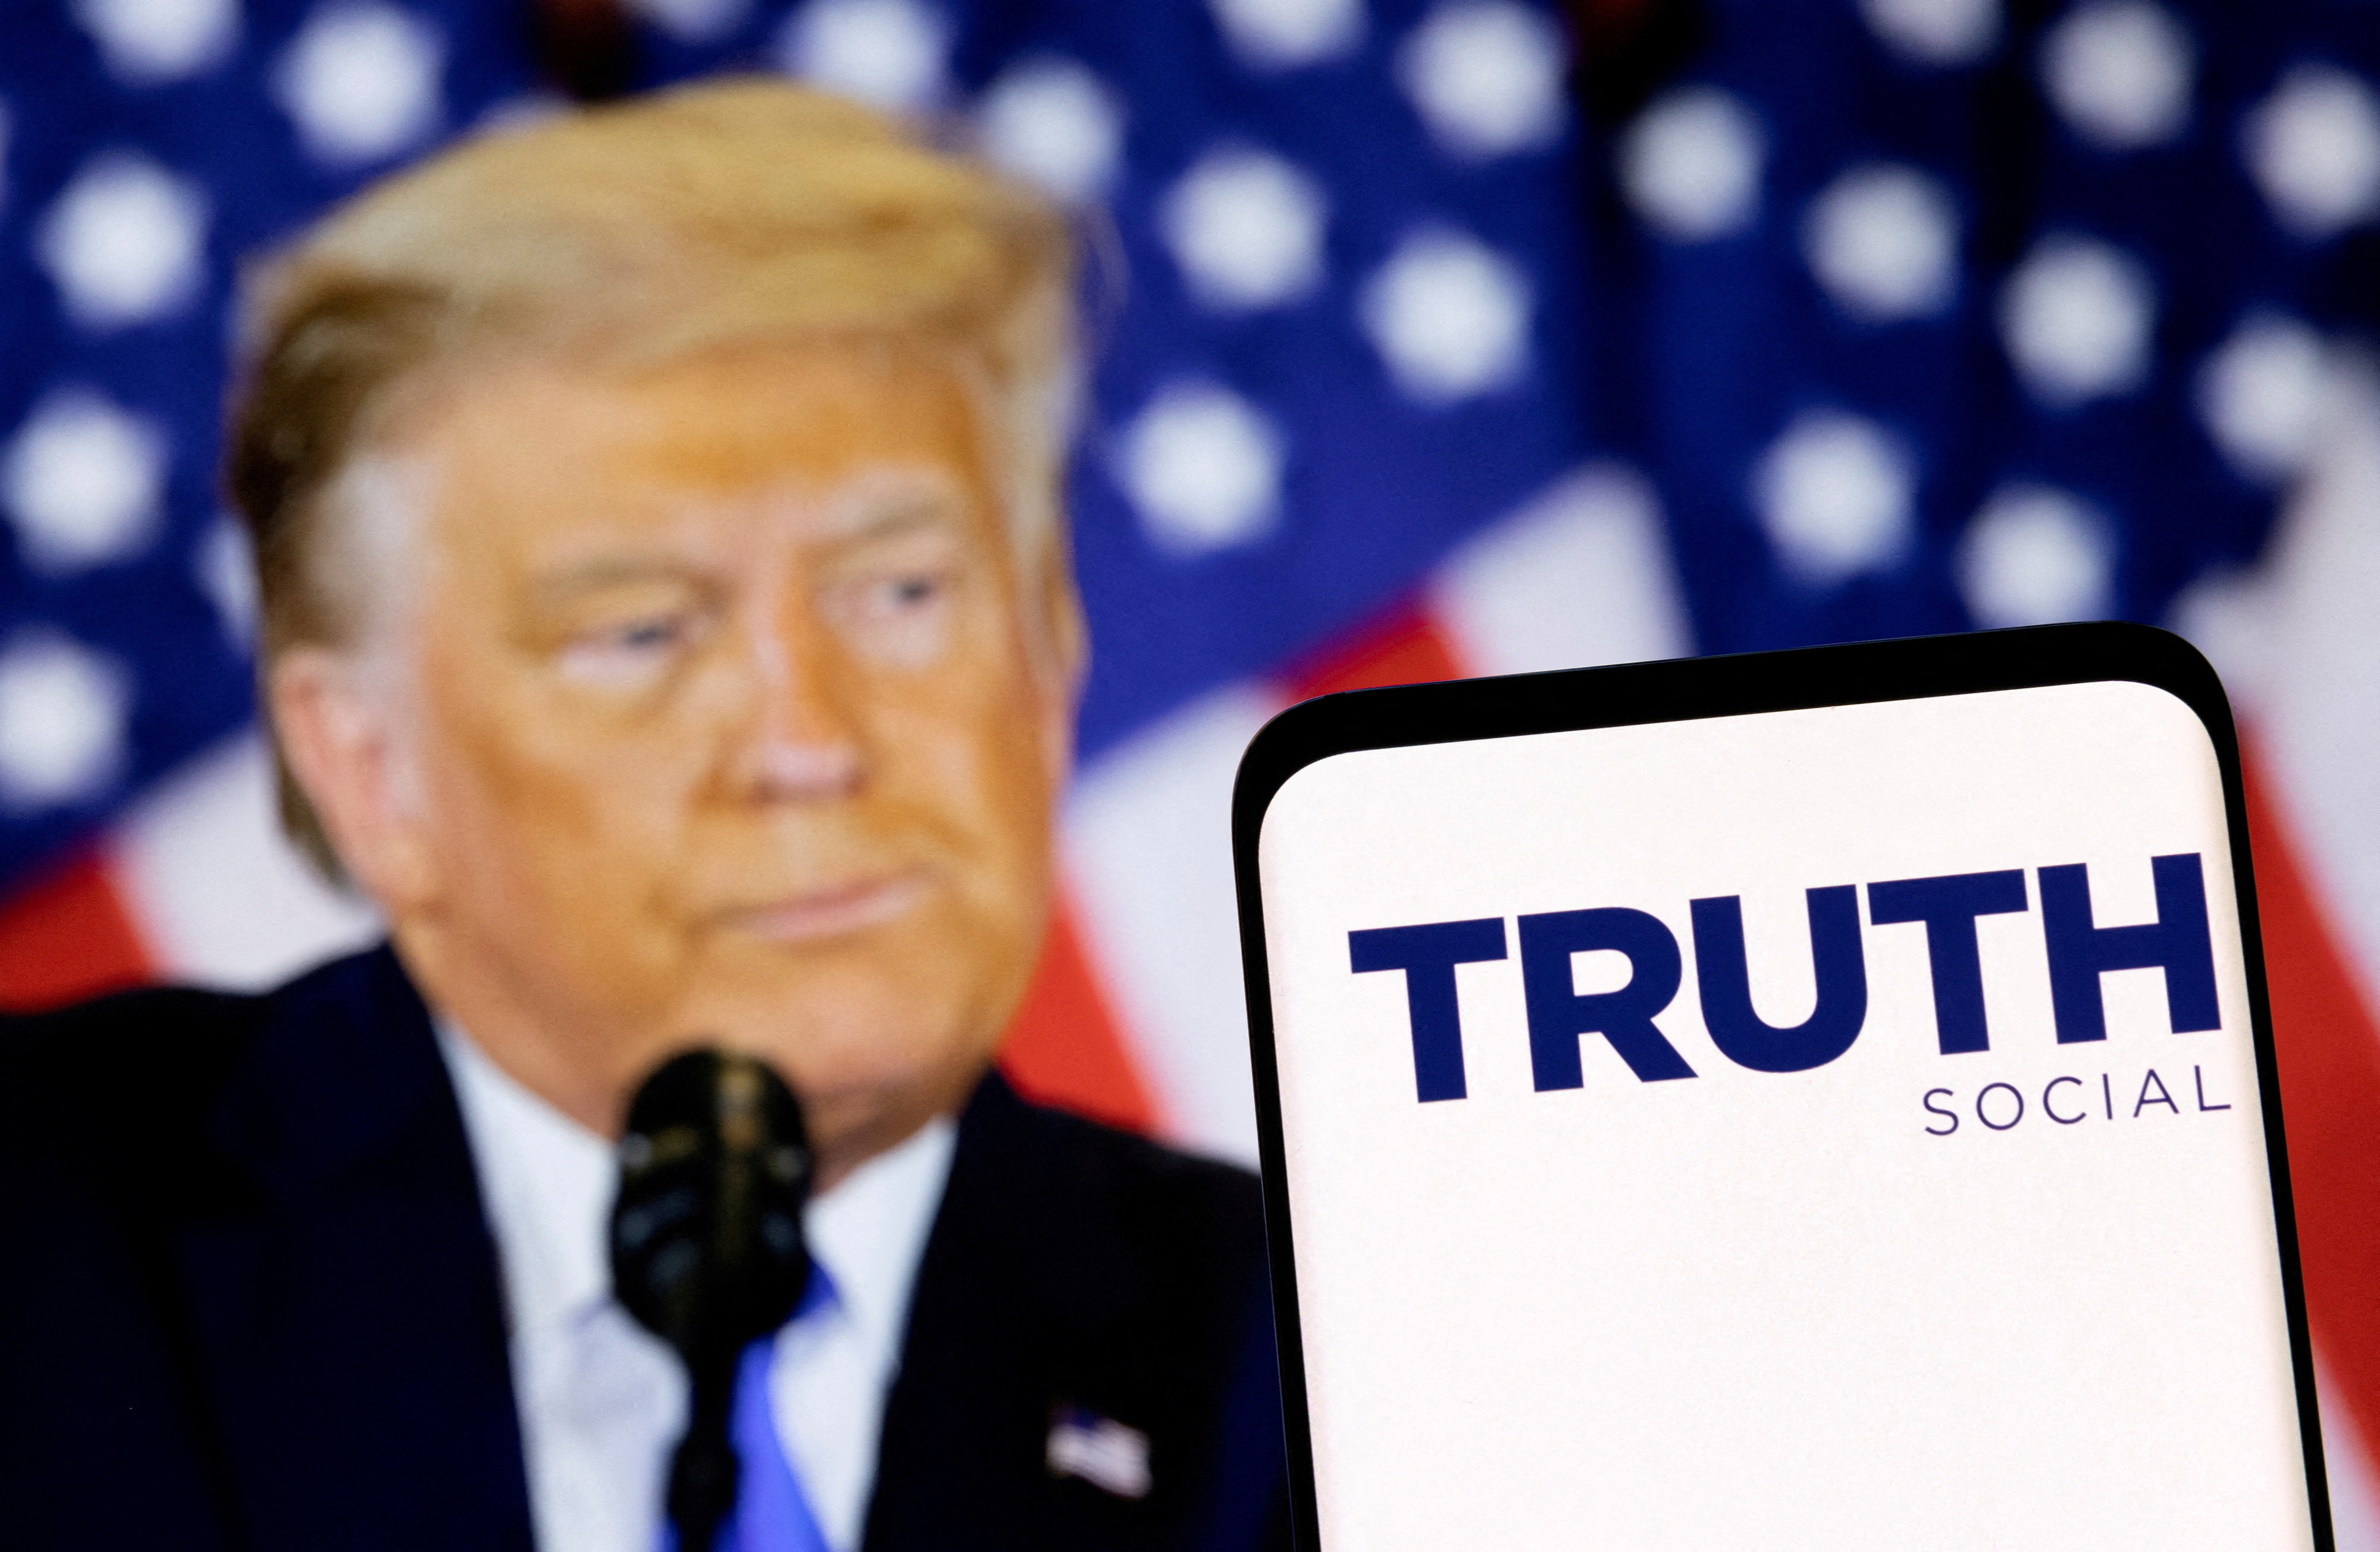 Truth social network logo and display of former U.S. President Donald Trump